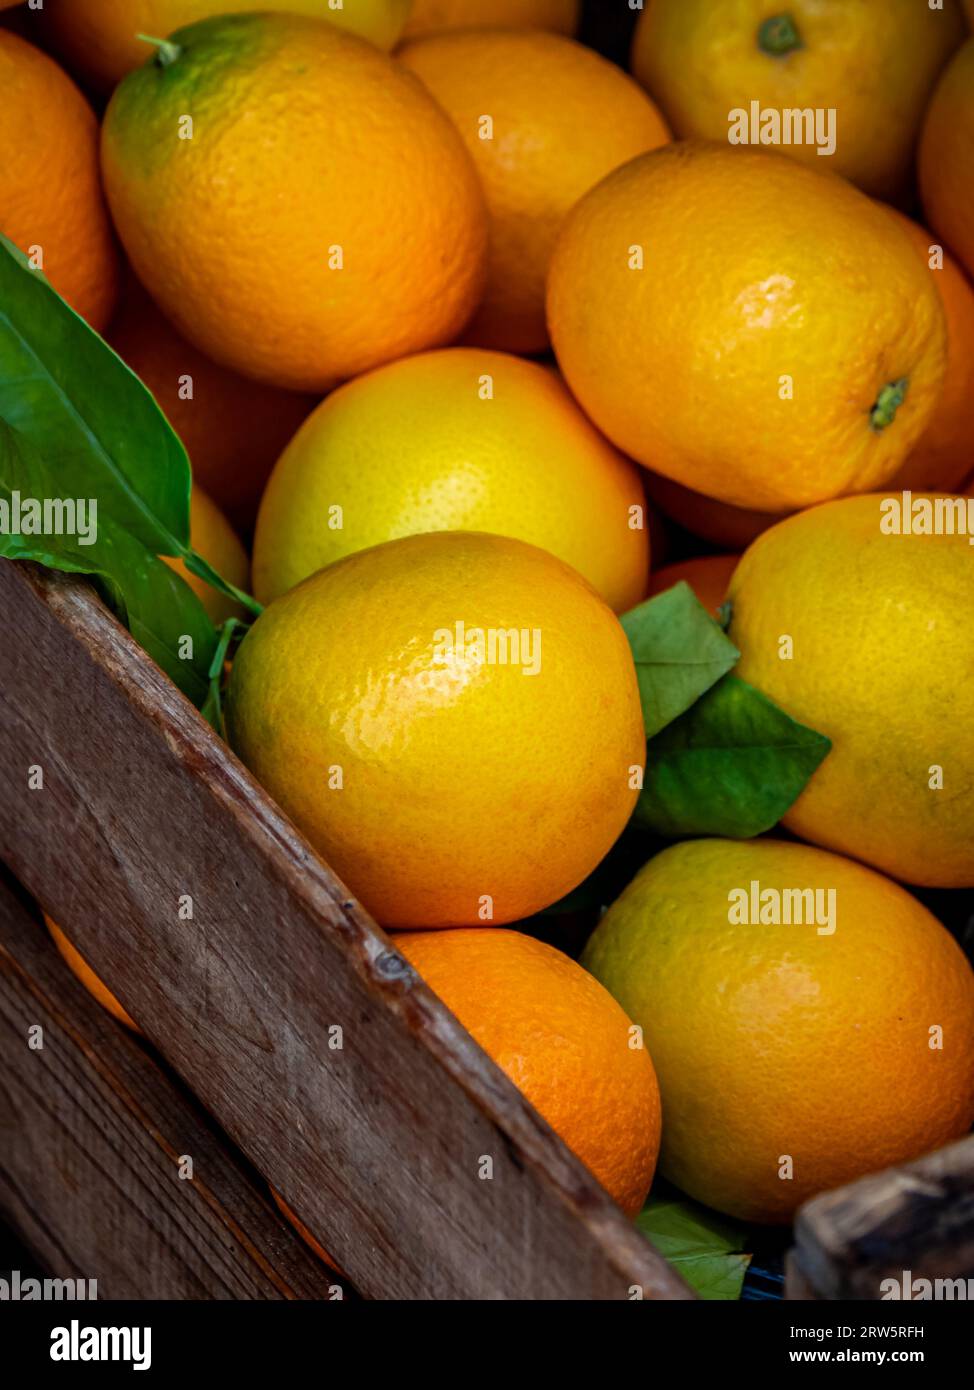 Peret Oranges in a wooden box, special Orange fruit variety from Sóller valley with a unique pear-like shape, vibrant yellow-green color and a perfect Stock Photo